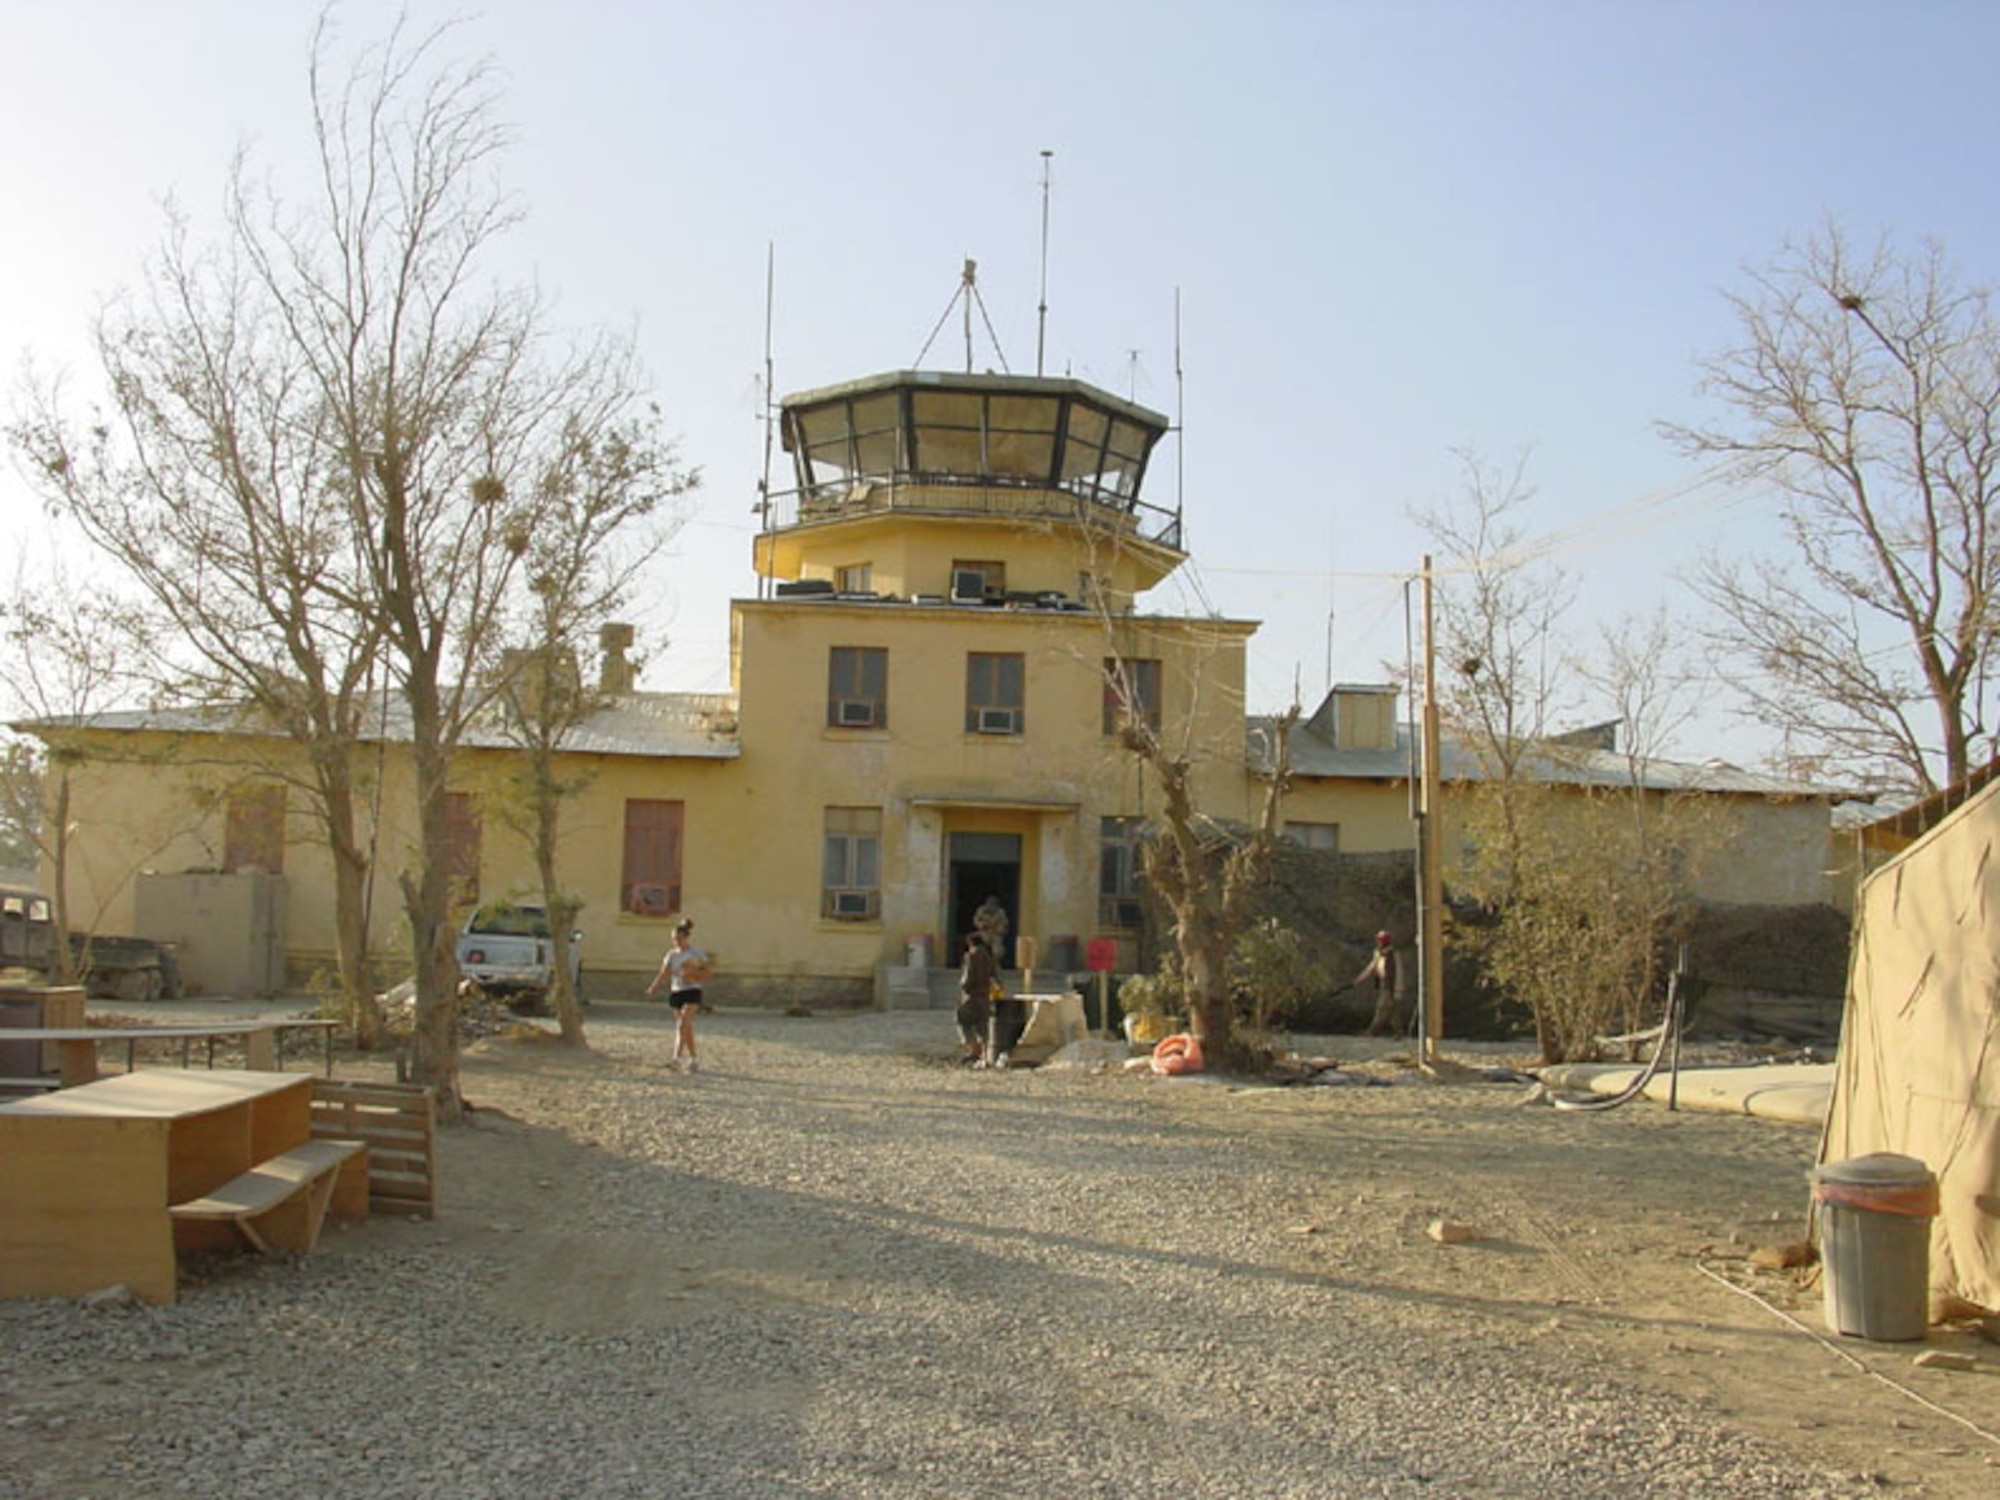 A front-view image of the old Russian control tower during April 2002. The tower, which is a familiar landmark to deployed service members and civilians who have worked here, was built on Bagram Airfield in 1976 during the Soviet Union's economic collaboration with Afghanistan.(Courtesy photo)